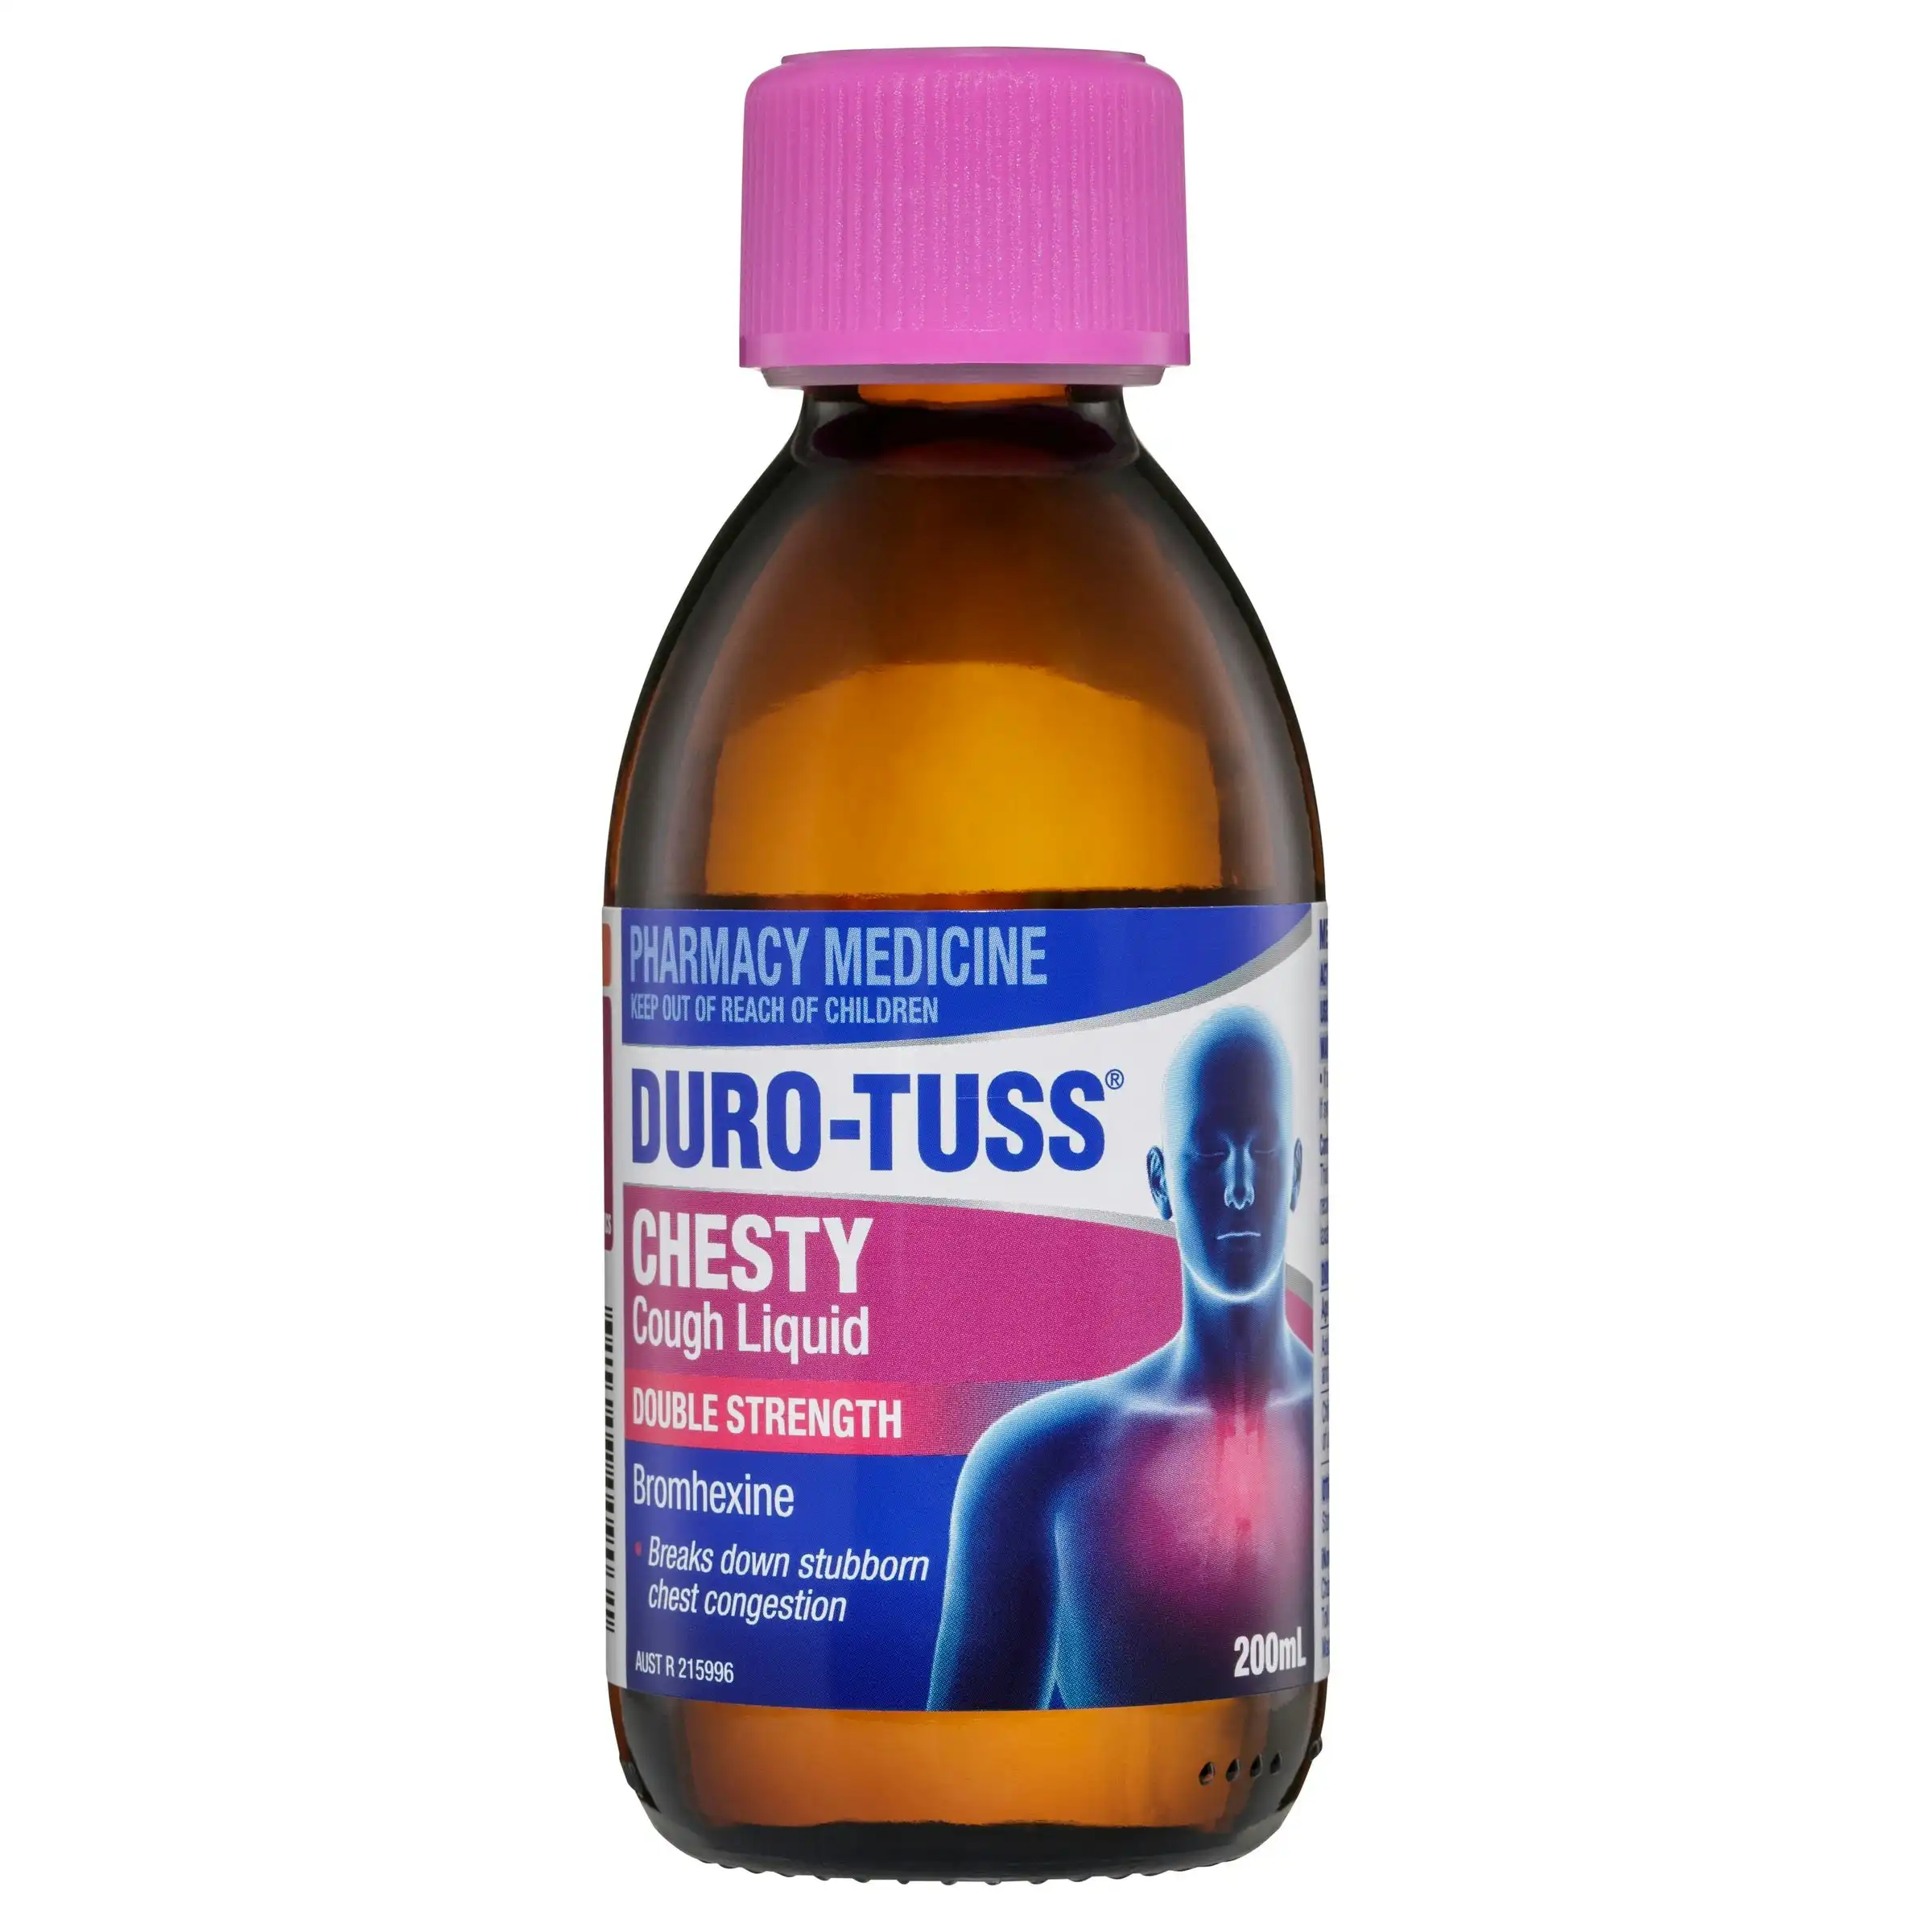 Duro-Tuss Chesty Cough Liquid Double Strength 200mL